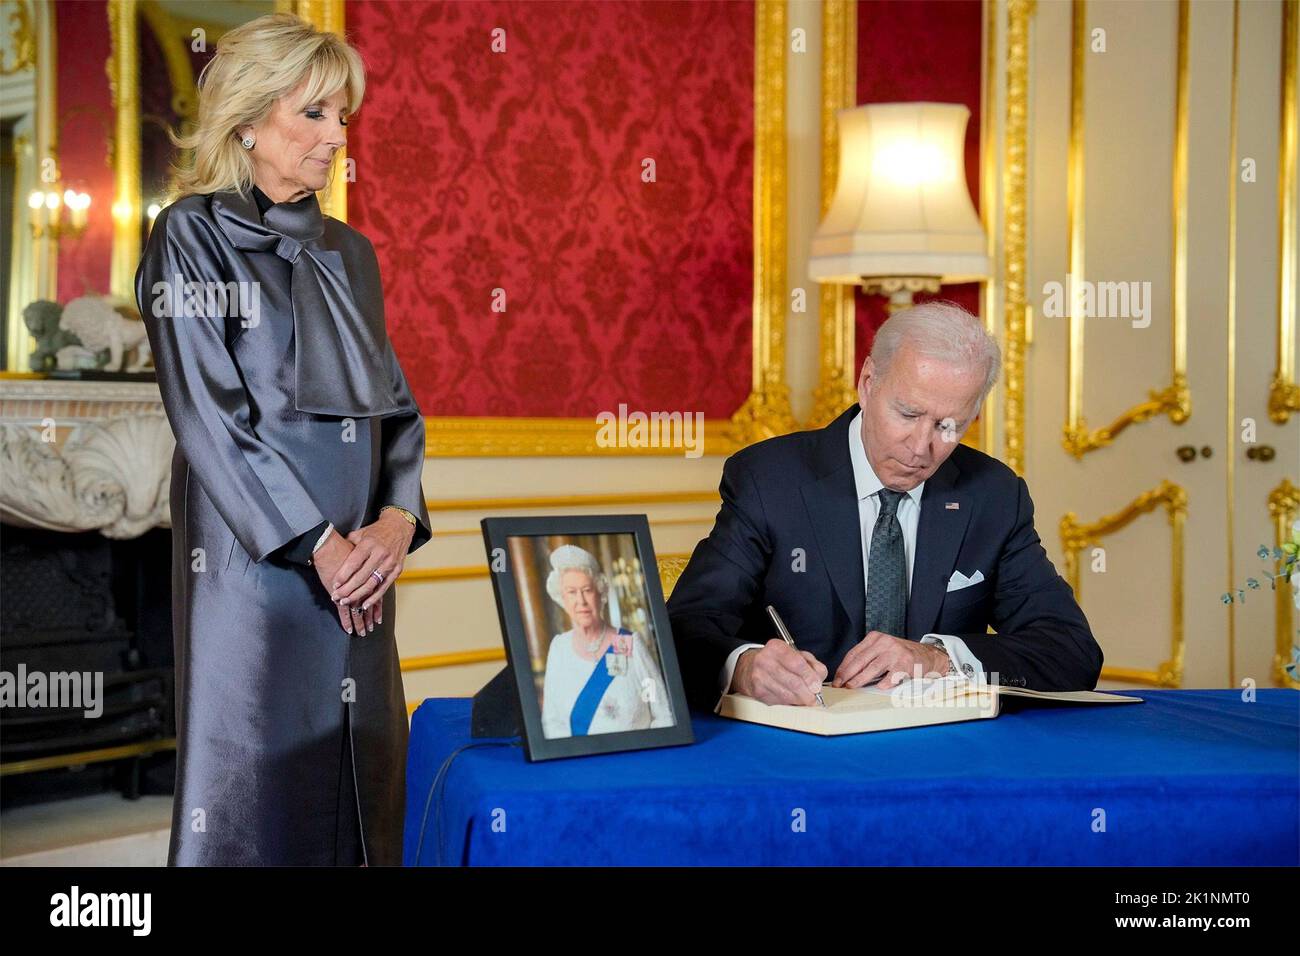 London, United Kingdom. 18th Sep, 2022. U.S. President Joe Biden signs the book of condolences on the death of Queen Elizabeth II, as First Lady Jill Biden looks on at Lancaster House, September 18, 2022, in London, United Kingdom. Credit: Adam Schultz/White House Photo/Alamy Live News Stock Photo